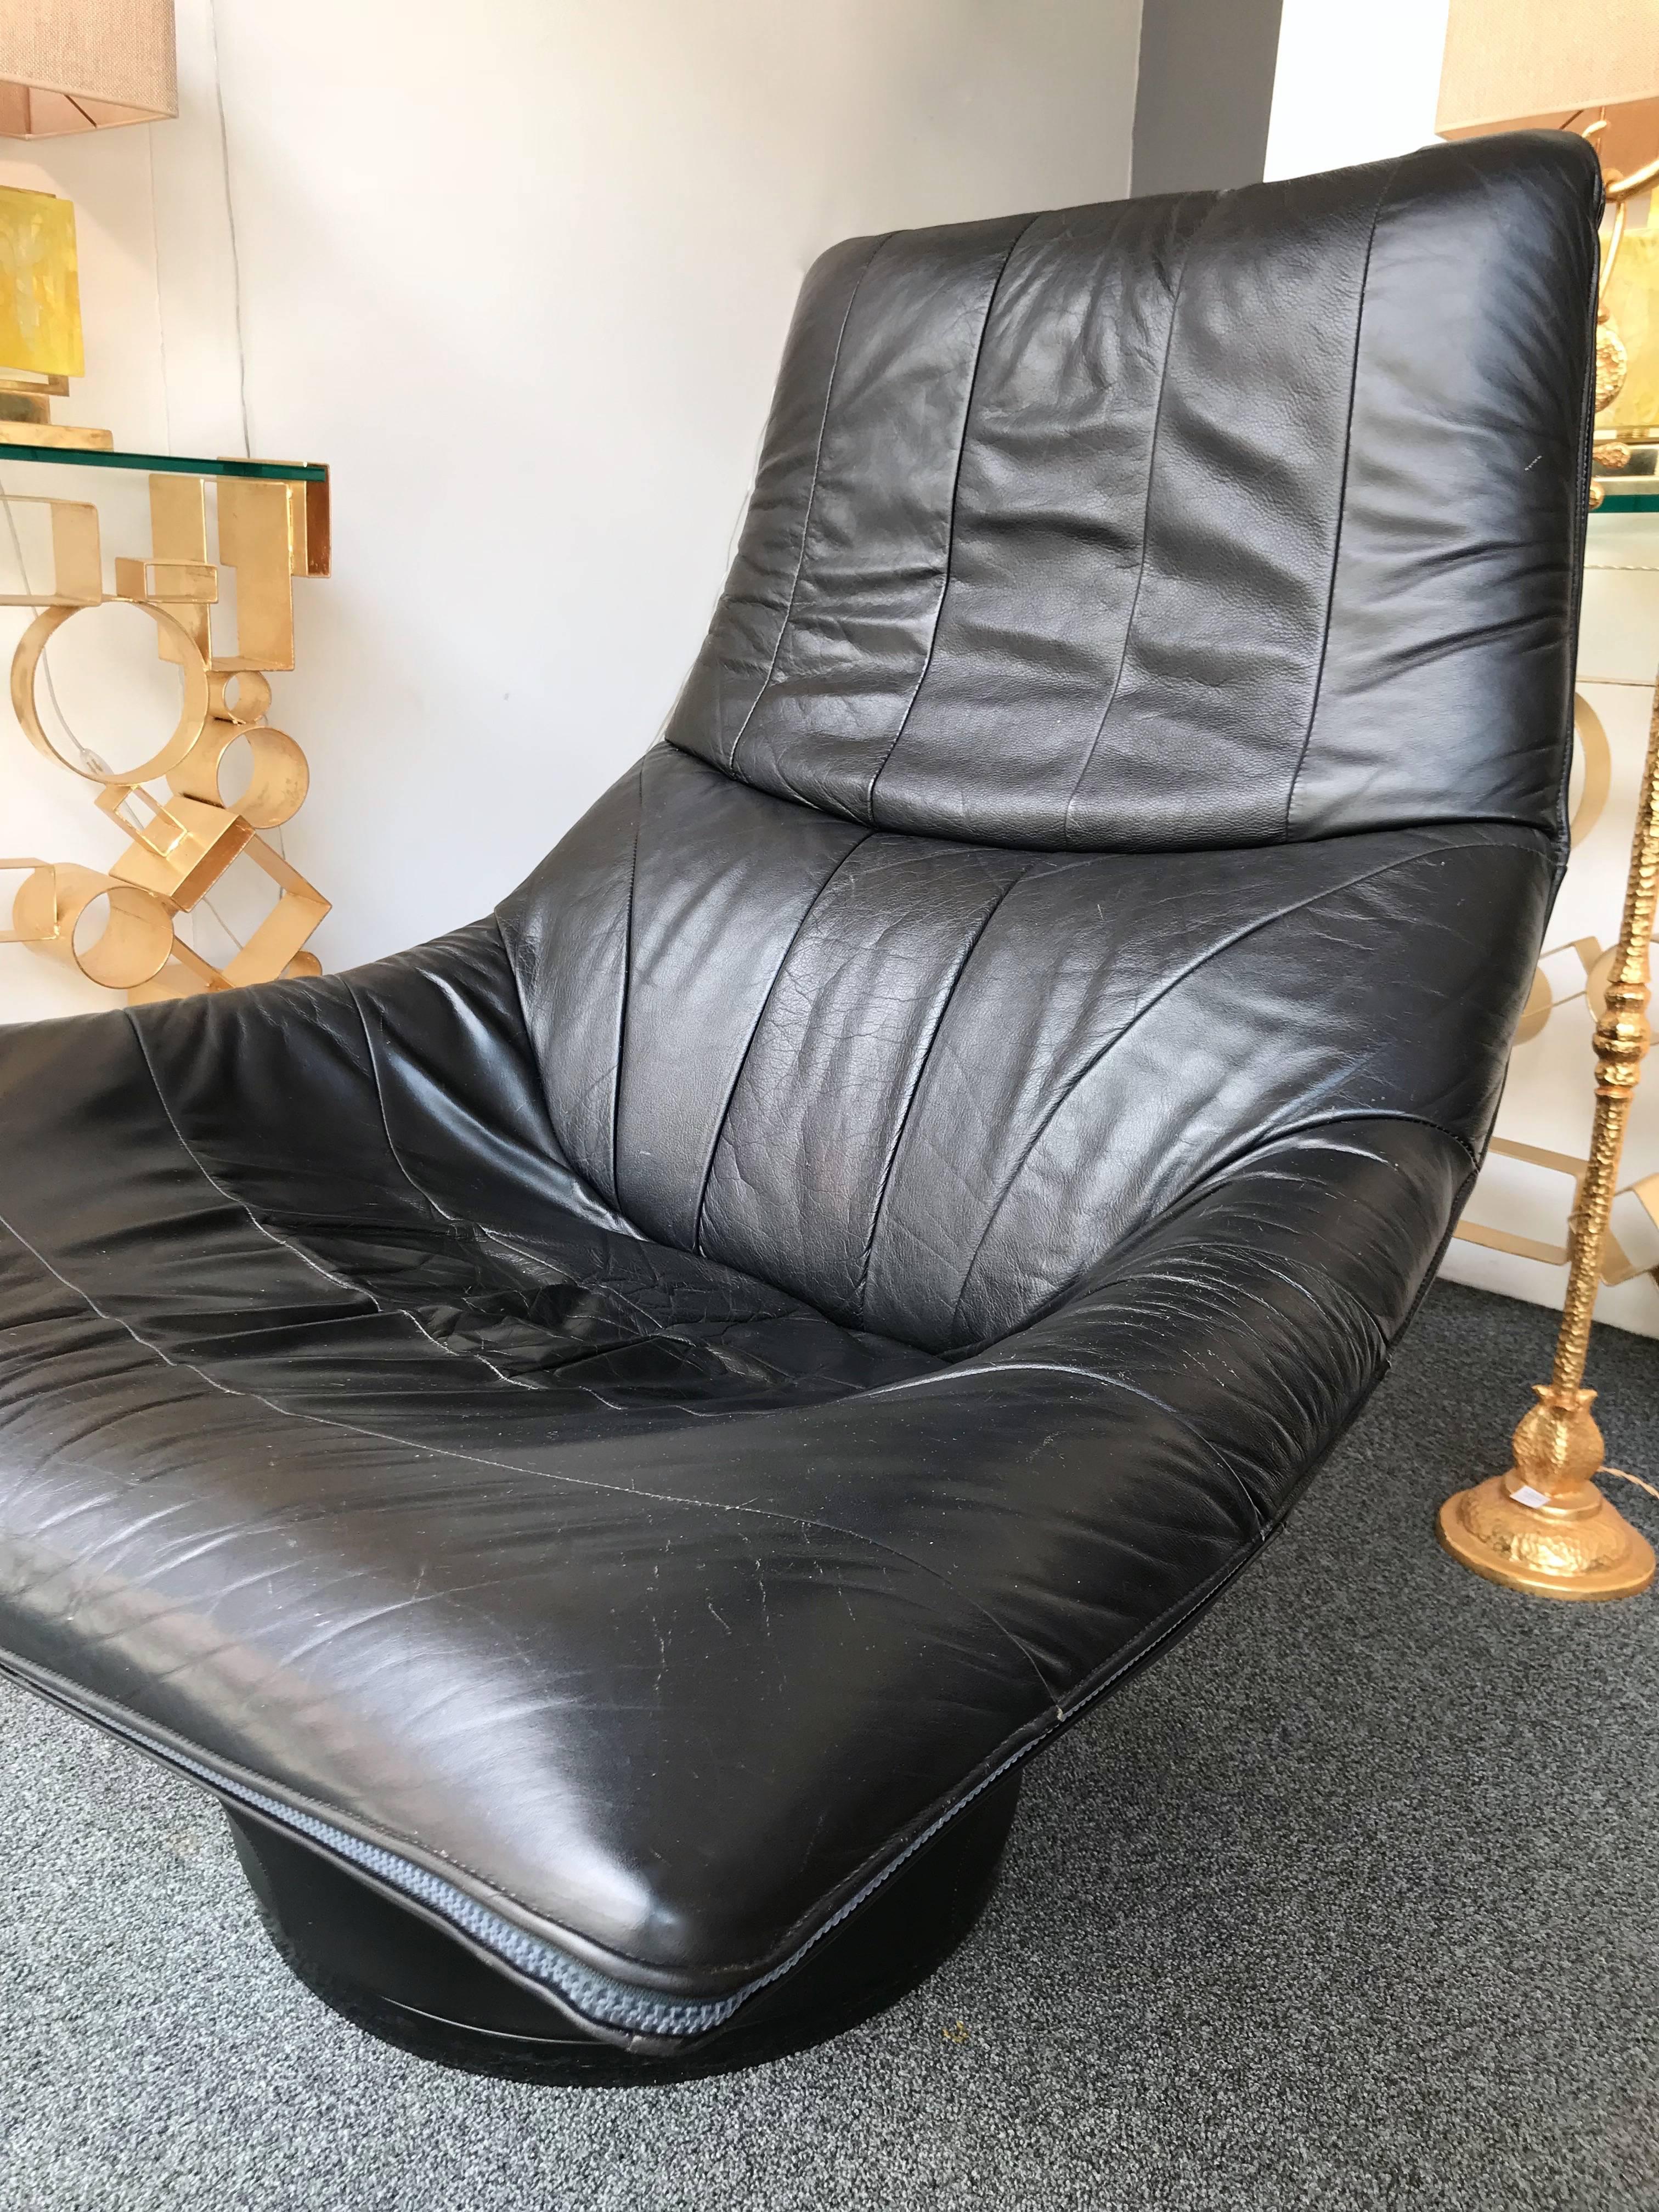 Pair of black leather armchairs or lounge chairs attributed to the designer Gerard Van den Berg for the Netherlands editor Montis. Very comfortable. Nice patina. Famous design like Saporiti, Walter Knoll, Molinari, Roche Bobois, De Sede, Cassina.